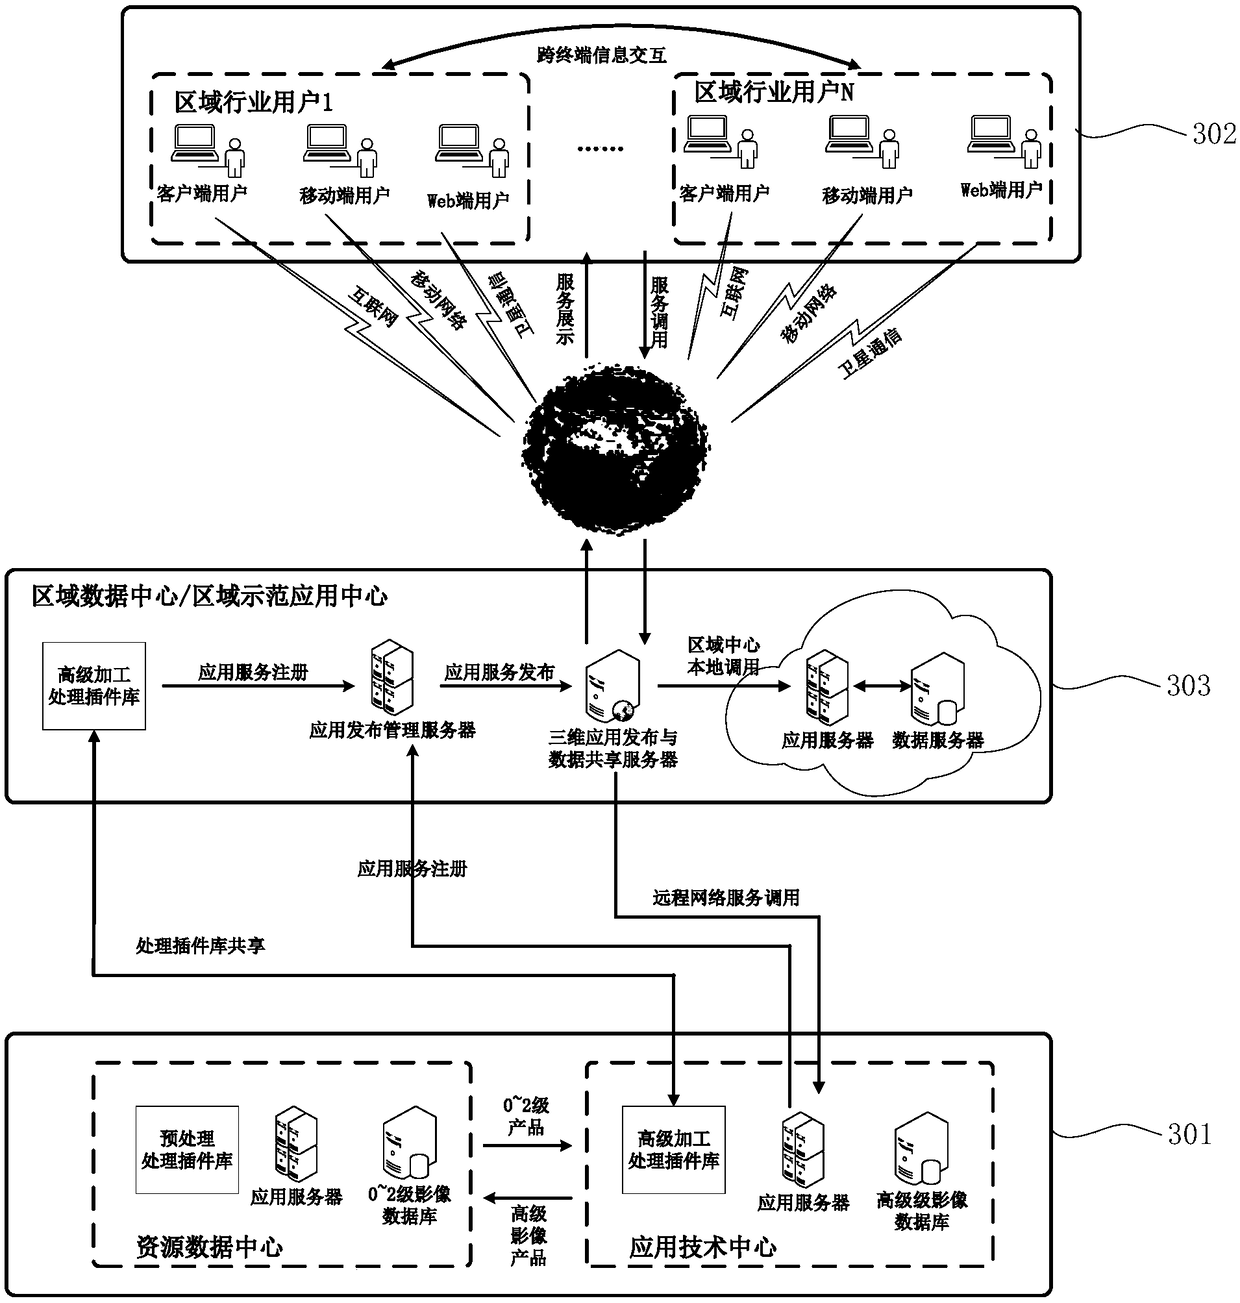 Multi-terminal mode high resolution resource dynamic allocation and on-demand service release system